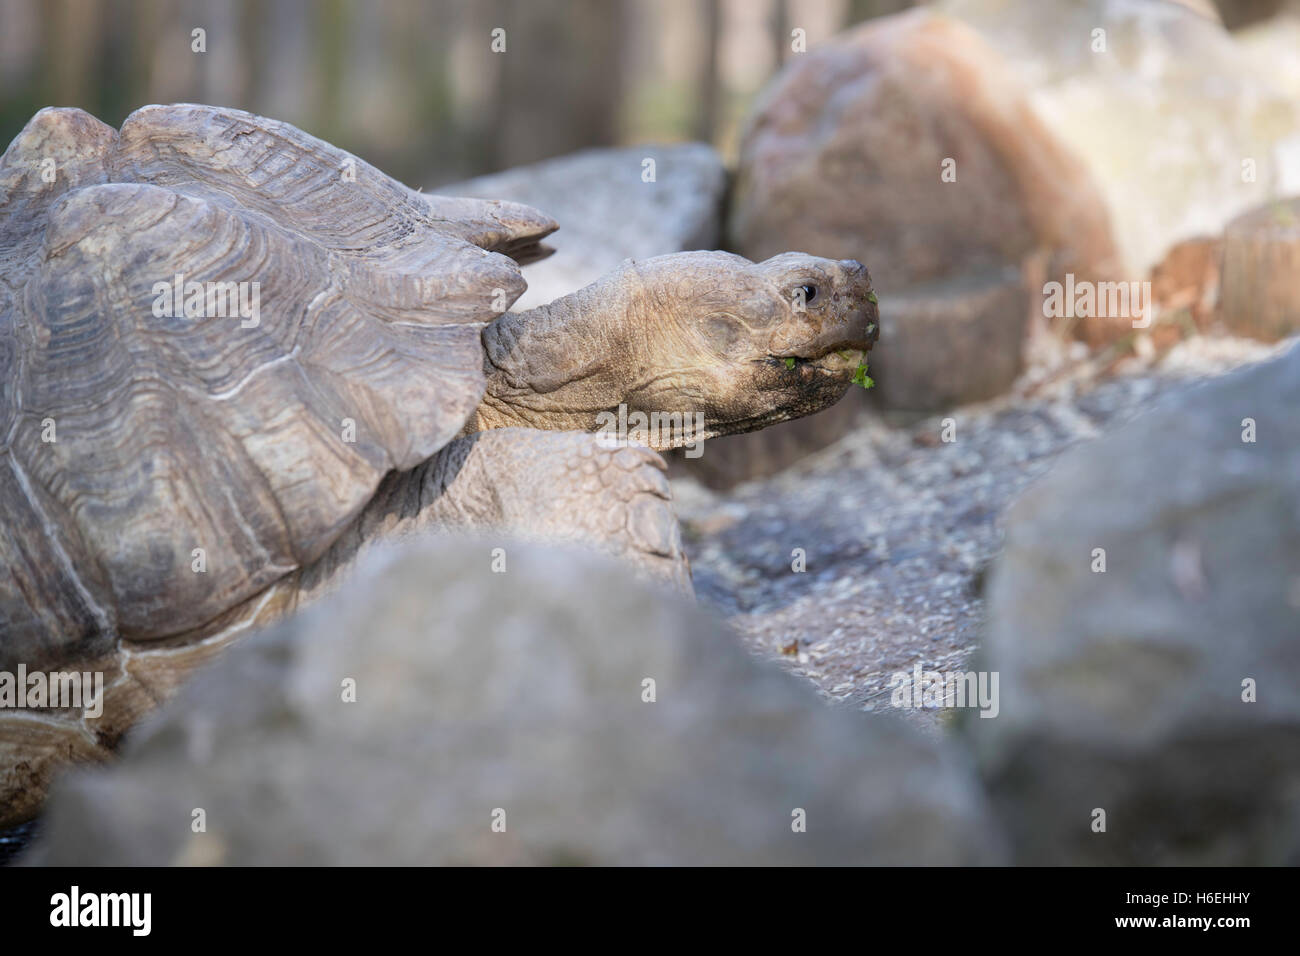 African spurred tortoise, close up head Stock Photo